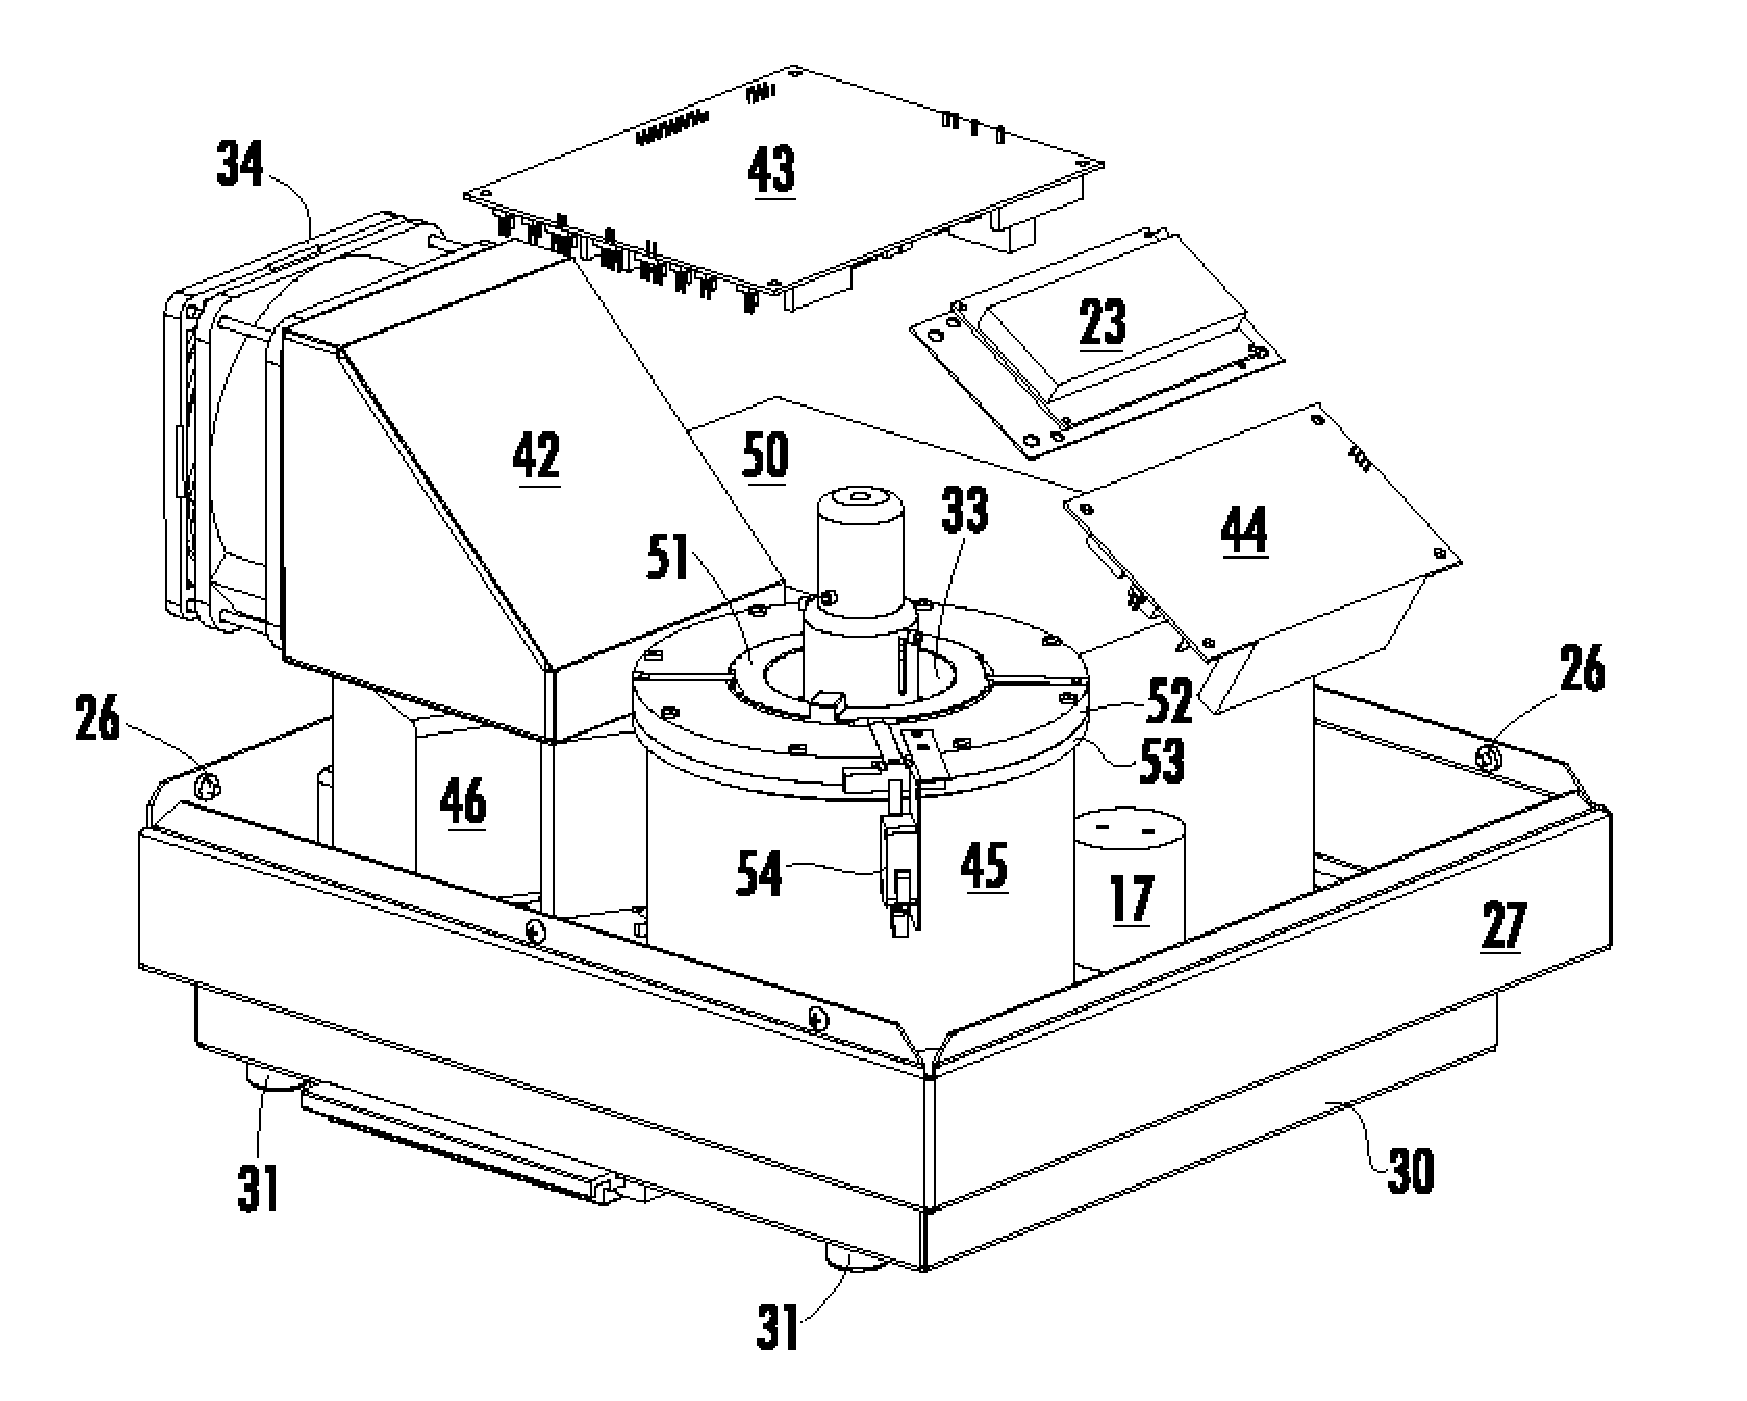 Microwave-Assisted Chemical Synthesis Instrument with Fixed Tuning